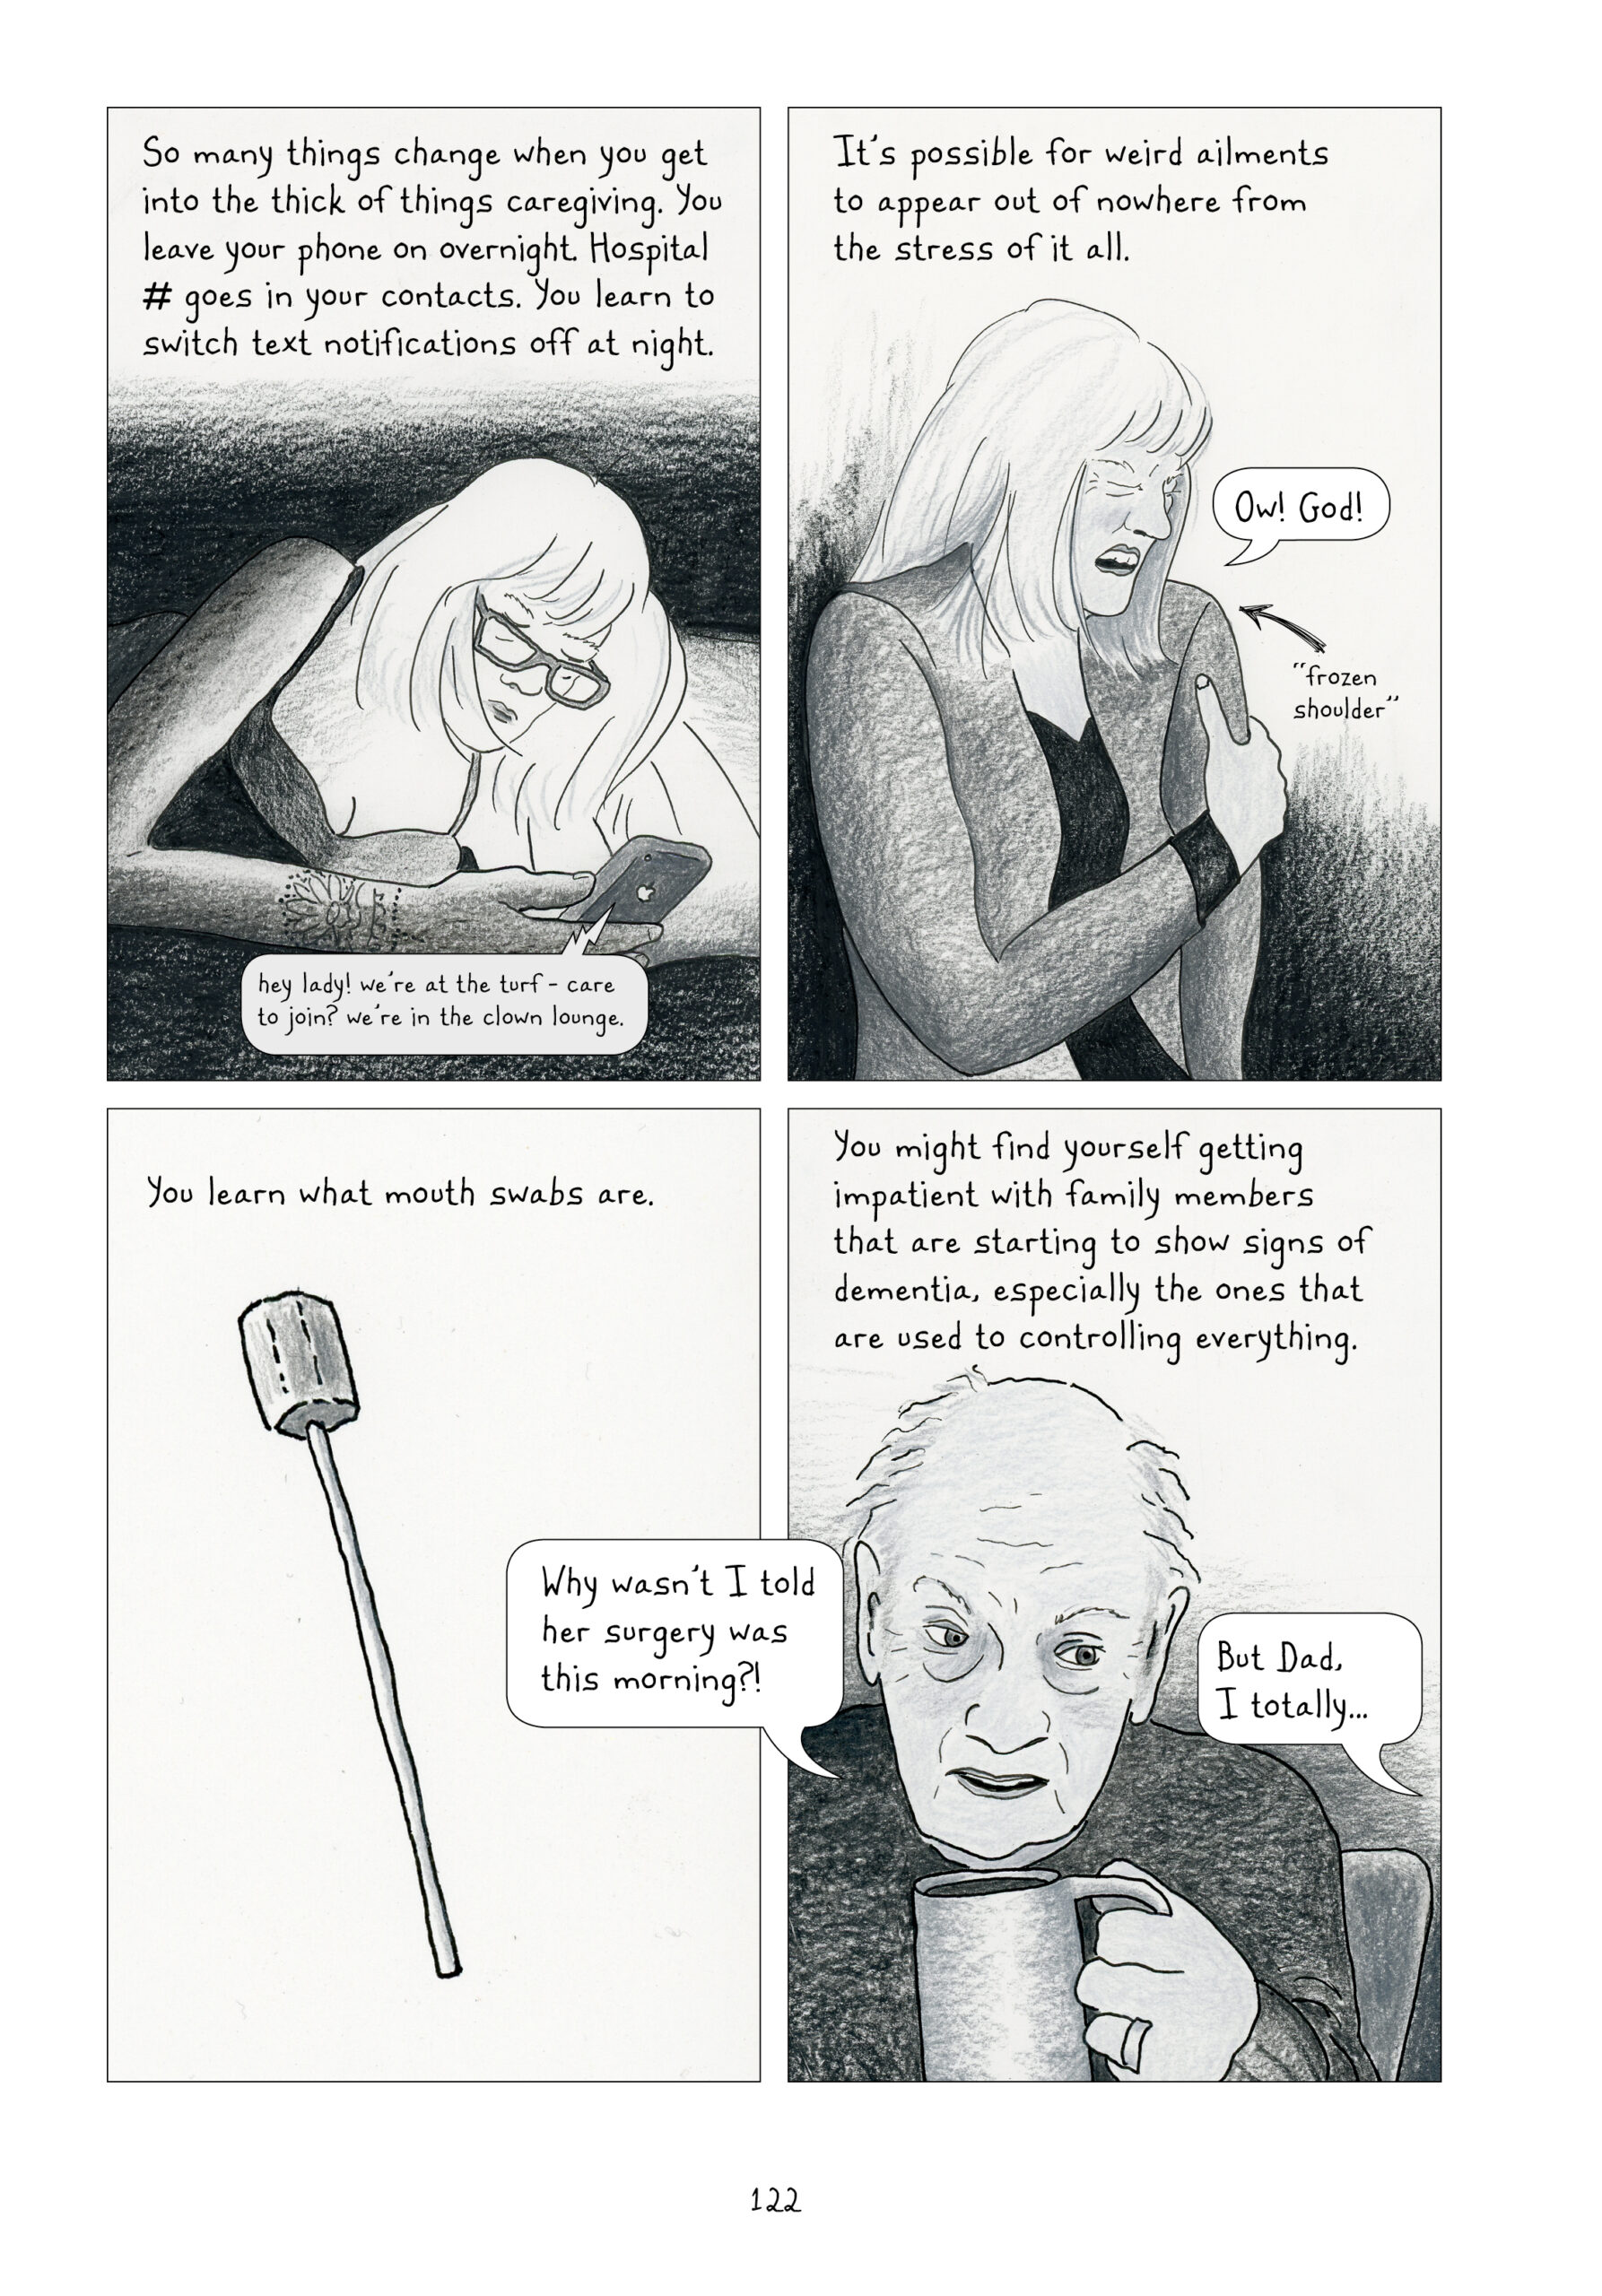 This page returns to entirely gray and white panels.

1. Lynn writes, “So many things change when you get into the thick of things caregiving. You leave your phone on overnight. Hospital number goes in your contacts. You learn to switch text notifications off at night.” Lynn as an adult is in bed, lying on her side and propped up on her elbow looking at her phone. The light from the screen is the only in the room, blaring in Lynn’s face. She is wearing glasses. She is reading a text that says, “hey lady! we’re at the turf - care to join? we’re in the clown lounge.”
2. “It’s possible for weird ailments to appear out of nowhere from the stress of it all.” Lynn is leaning against a wall clutching her shoulder and grimacing in pain. She calls out, “Ow! God!” She labels with an arrow that she is experiencing “frozen shoulder.”
3. “You learn what mouth swabs are.” A large cotton swab, that resembles a marshmallow on a stick more than a Q-tip, takes up the panel. The background is blank.” Dialogue from the next panel bleeds into this one.
4. Lynn continues narrating, “You might find yourself getting impatient with family members that are starting to show signs of dementia, especially the ones that are used to controlling everything.” Lynn’s dad, mostly bald and looking upset, asks, “Why wasn’t I told her surgery was this morning?” (This quote bubble overlaps the last panel.) From off-panel, Lynn responds, “But. Dad, I totally…”